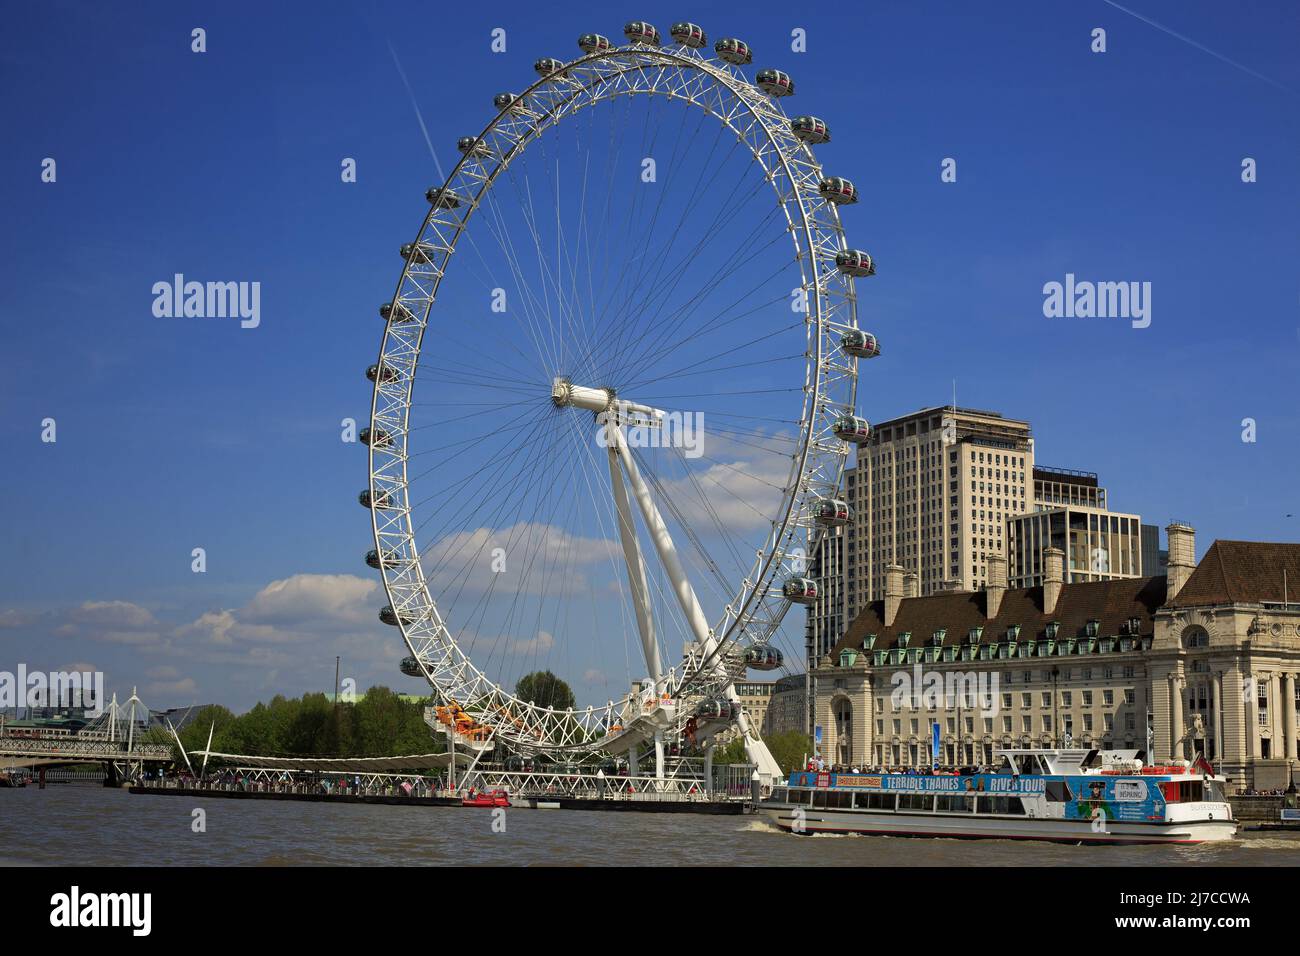 London Eye, Westminster, UK, 2022.  The Millennium Wheel - AKA The London Eye is a major tourist attraction in London, it has 32 pods - each depicts o Stock Photo